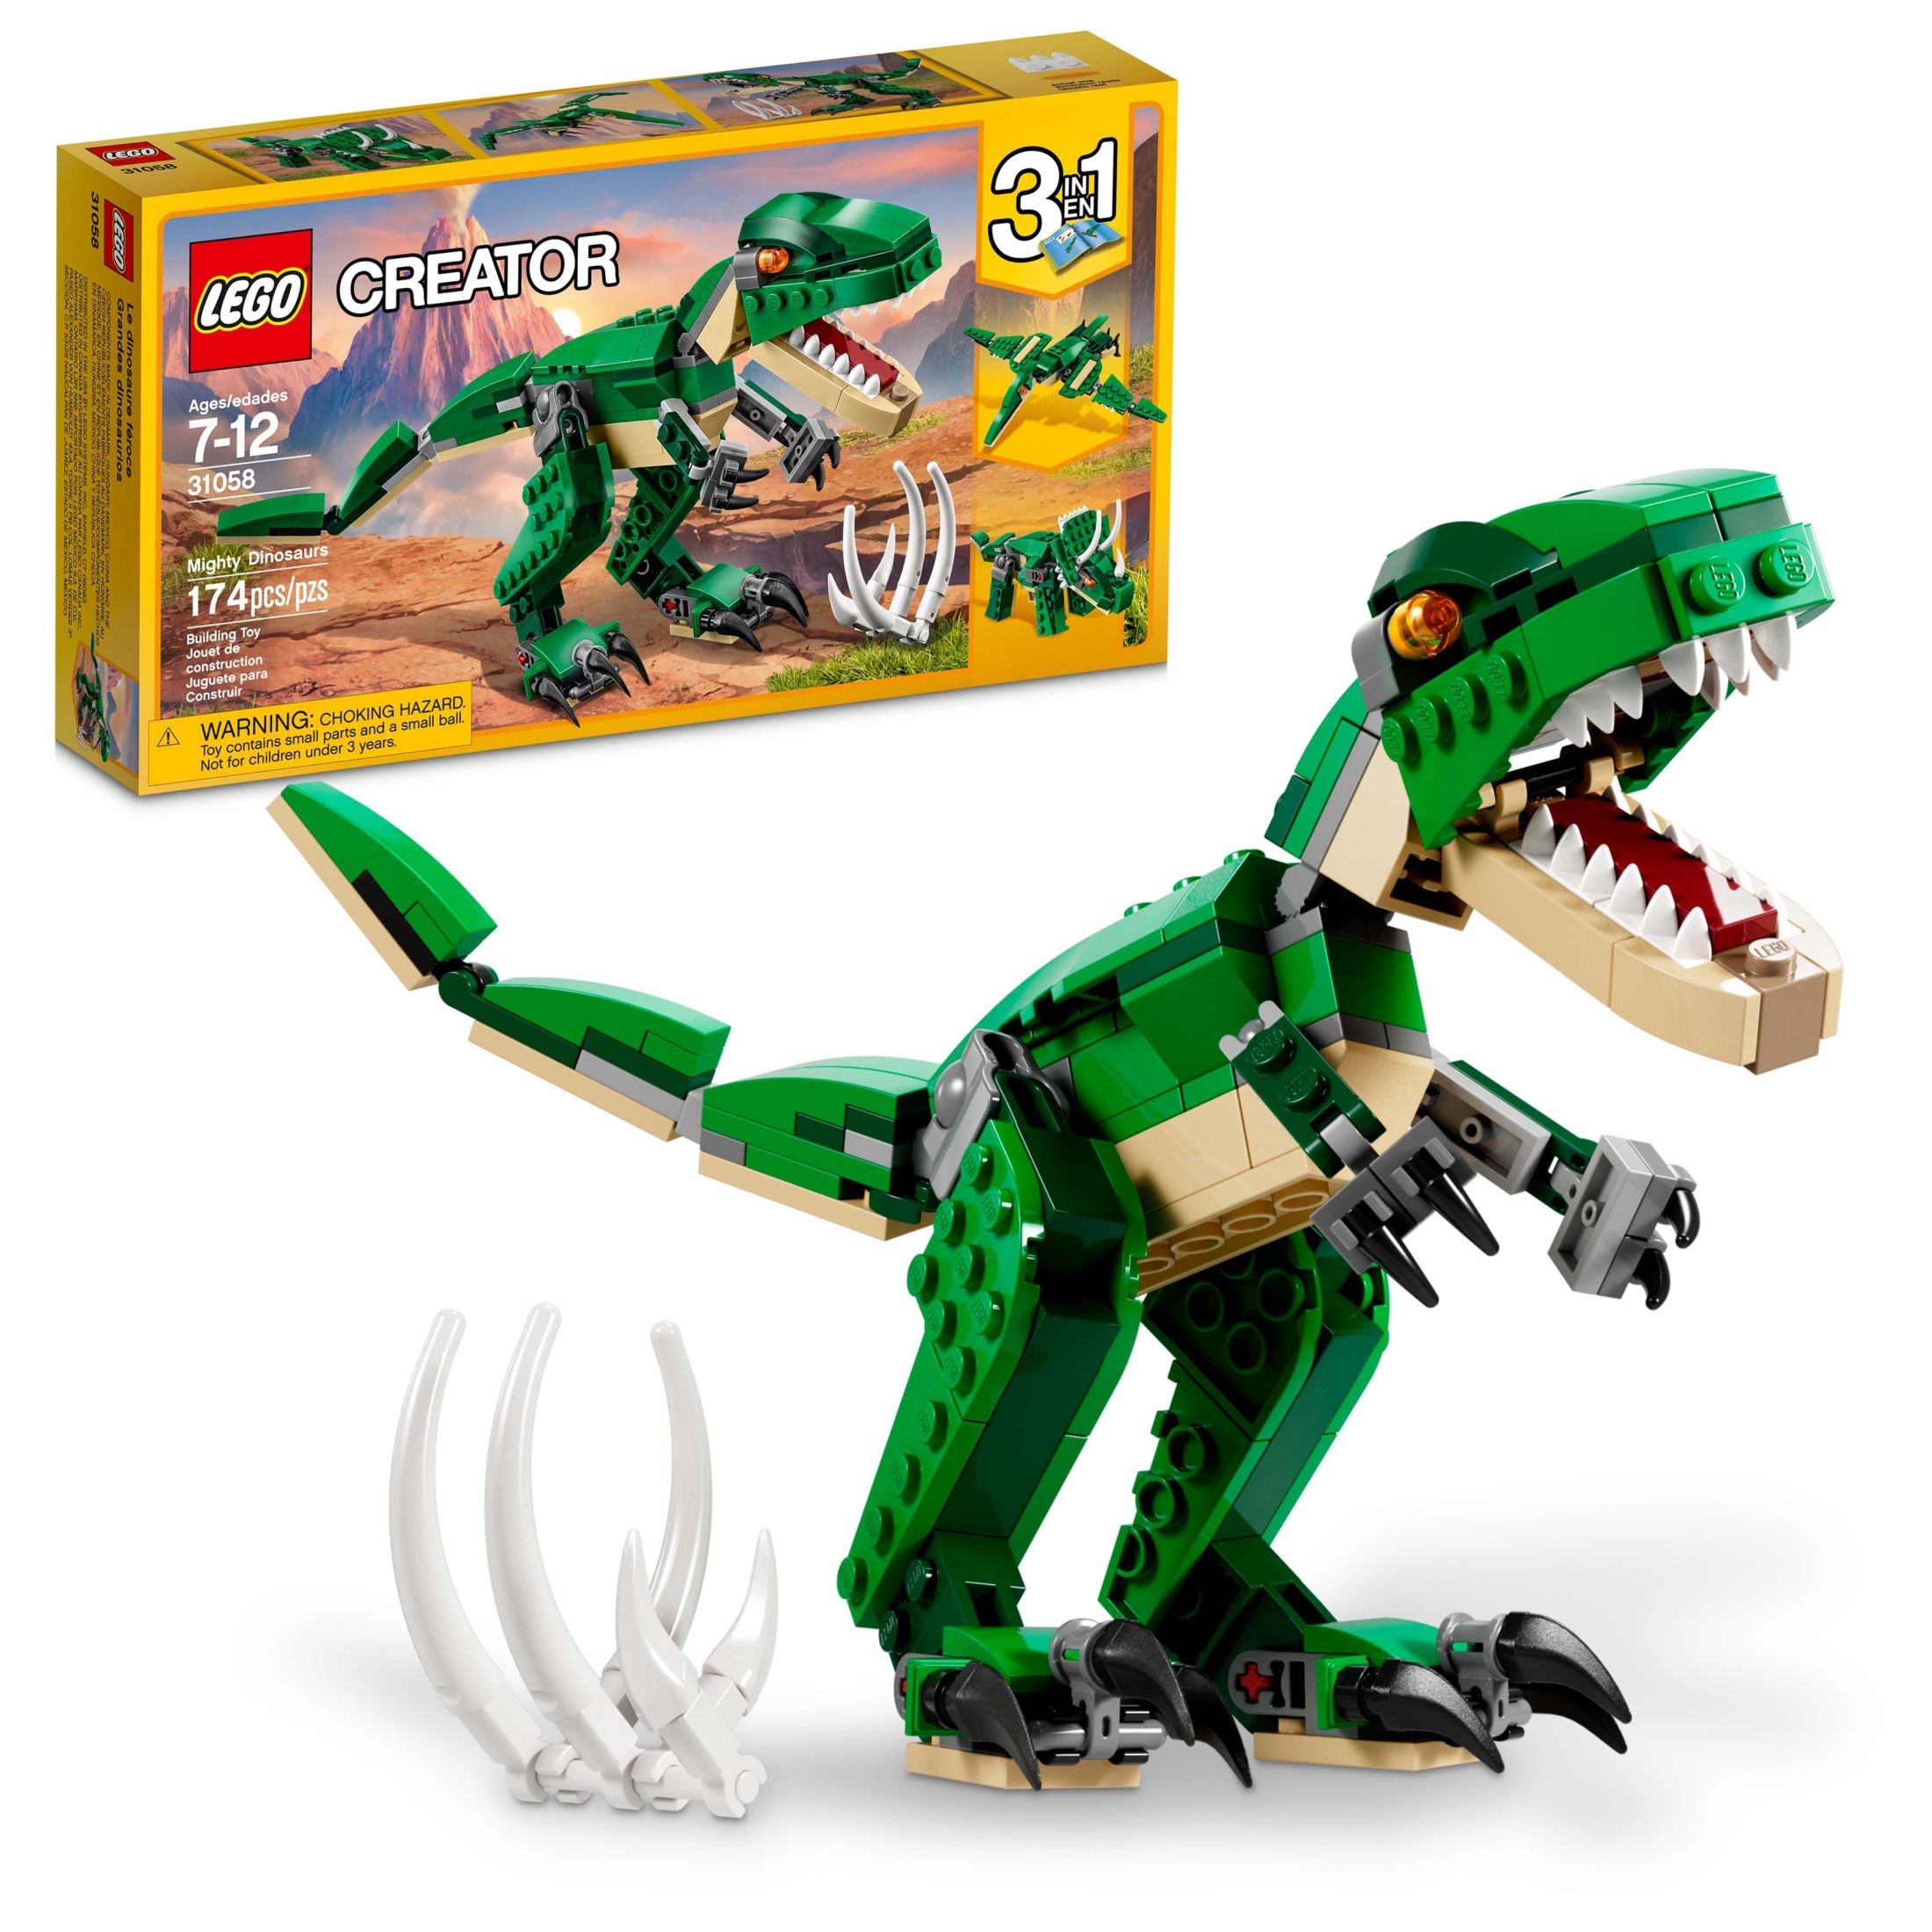 LEGO Creator 3 in 1 Mighty Dinosaur Toy, Transforms from T. rex to Triceratops to Pterodactyl Dinosaur Figures, Great Gift for 7 - 12 Year Old Boys & Girls, 31058 - image 1 of 6